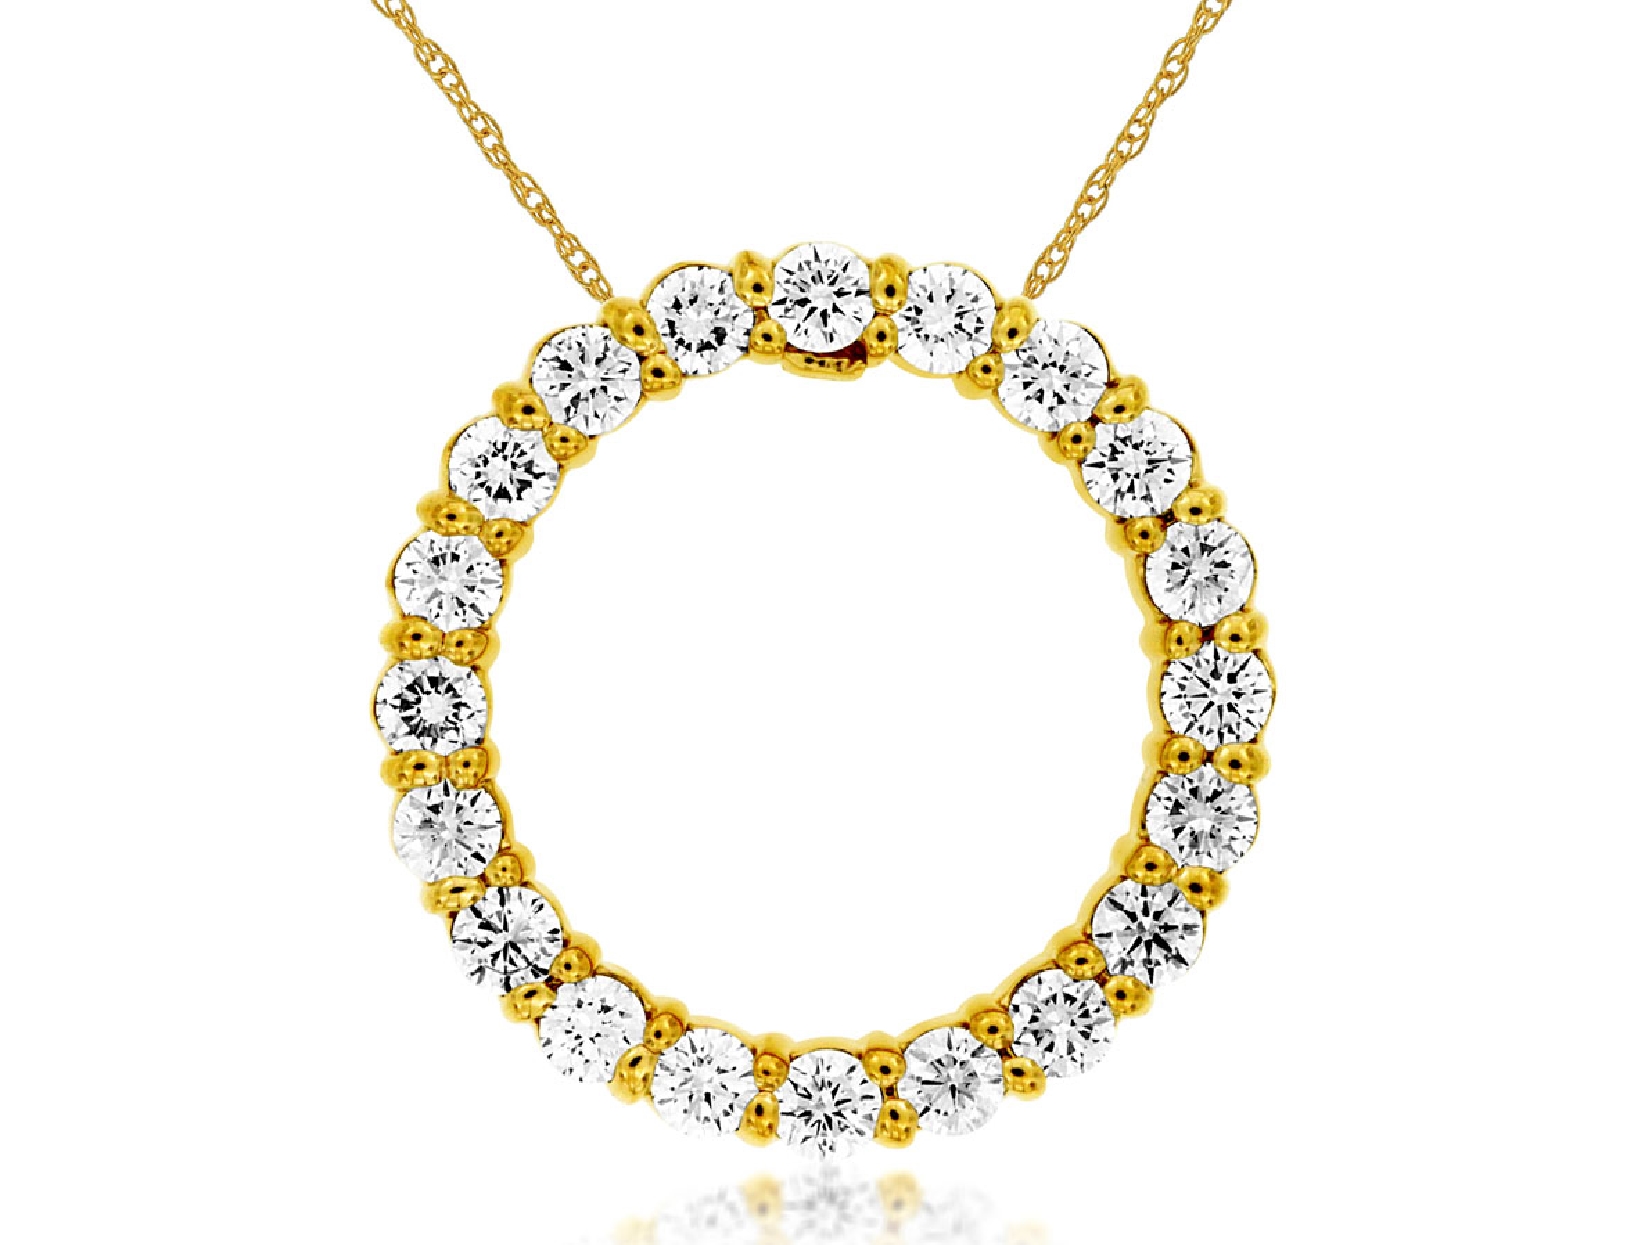 14K Yellow Gold Necklace with Circular Diamond Pendant
1.00ct
18 Inches